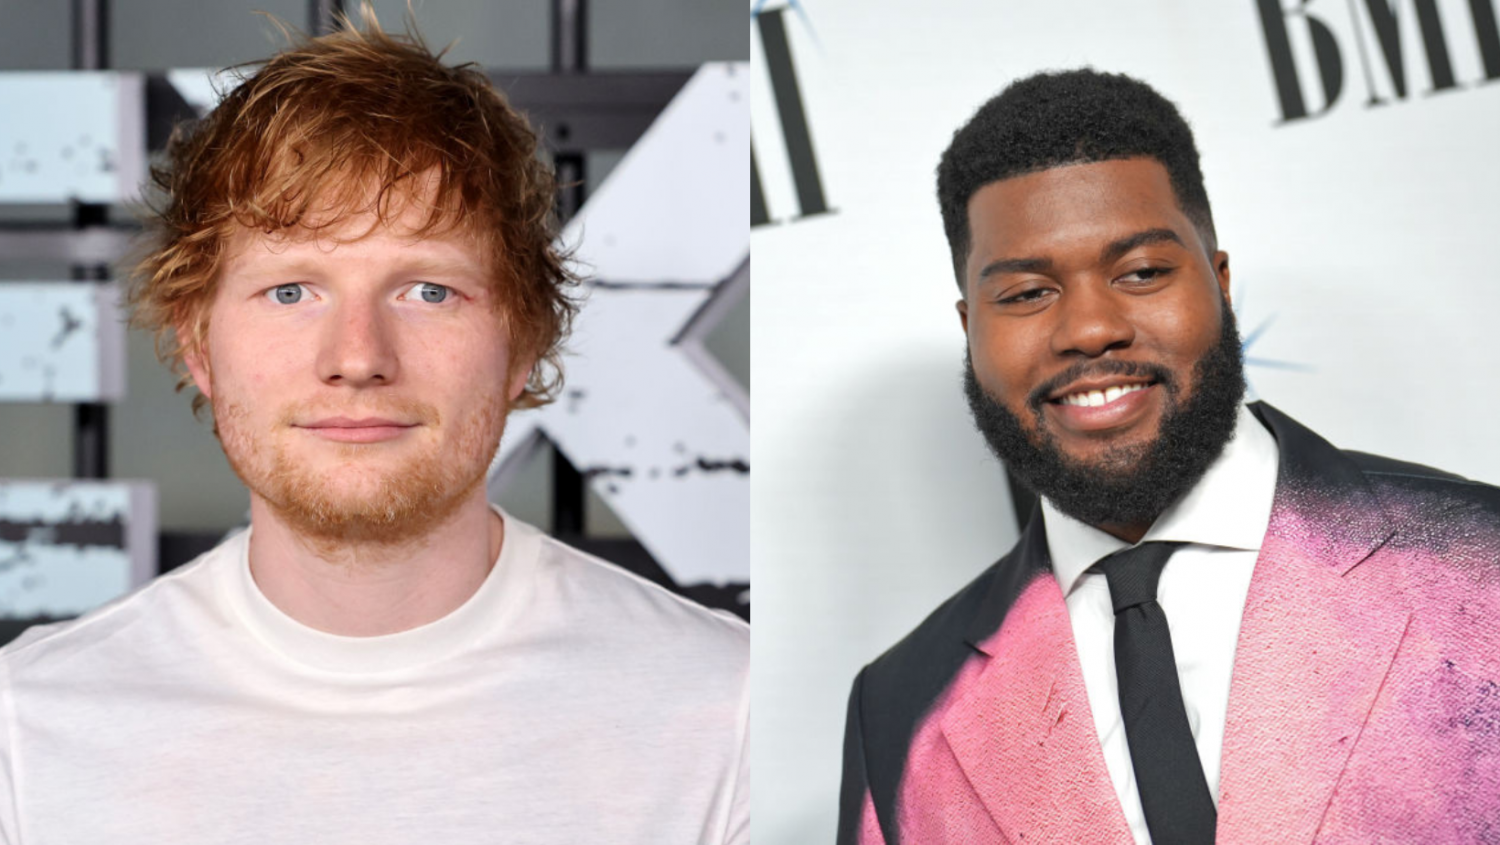 Ed Sheeran Opens Own Concert While Khalid Recovers from Car Accident [REPORT]